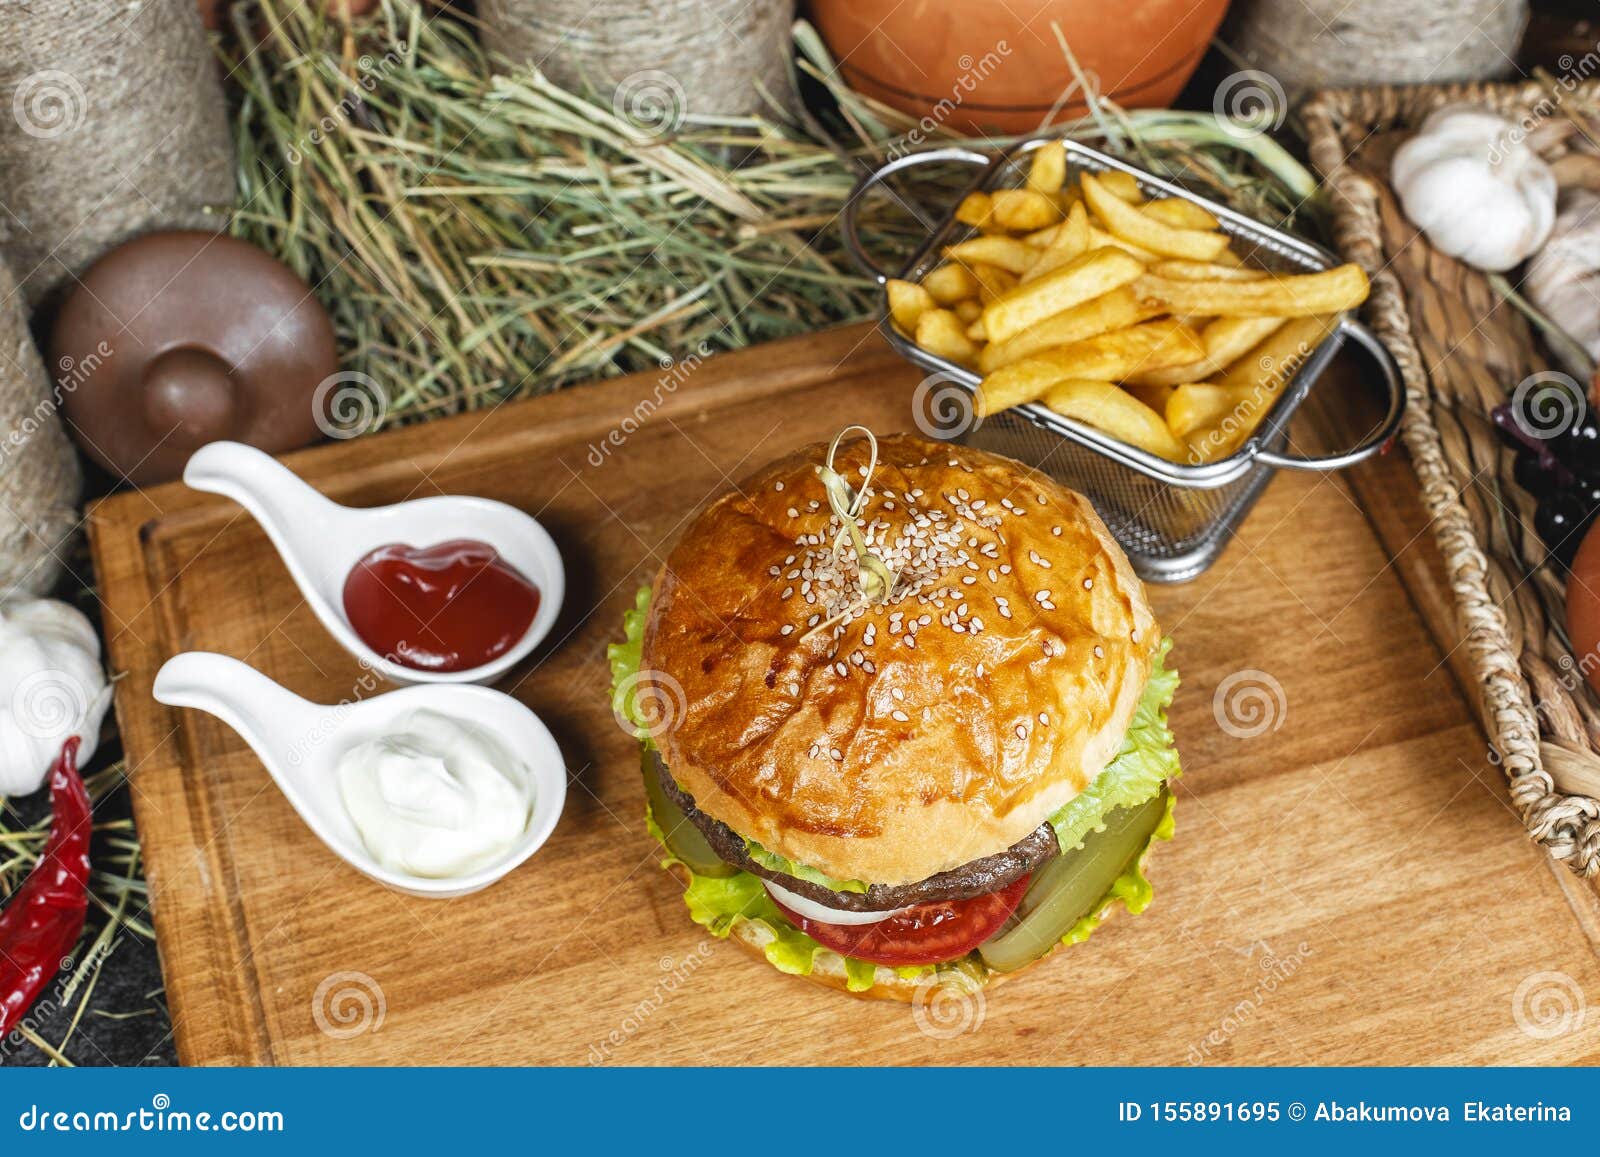 Hamburger With French Fries Ketchup And Creamy Sauce In Oriental Style